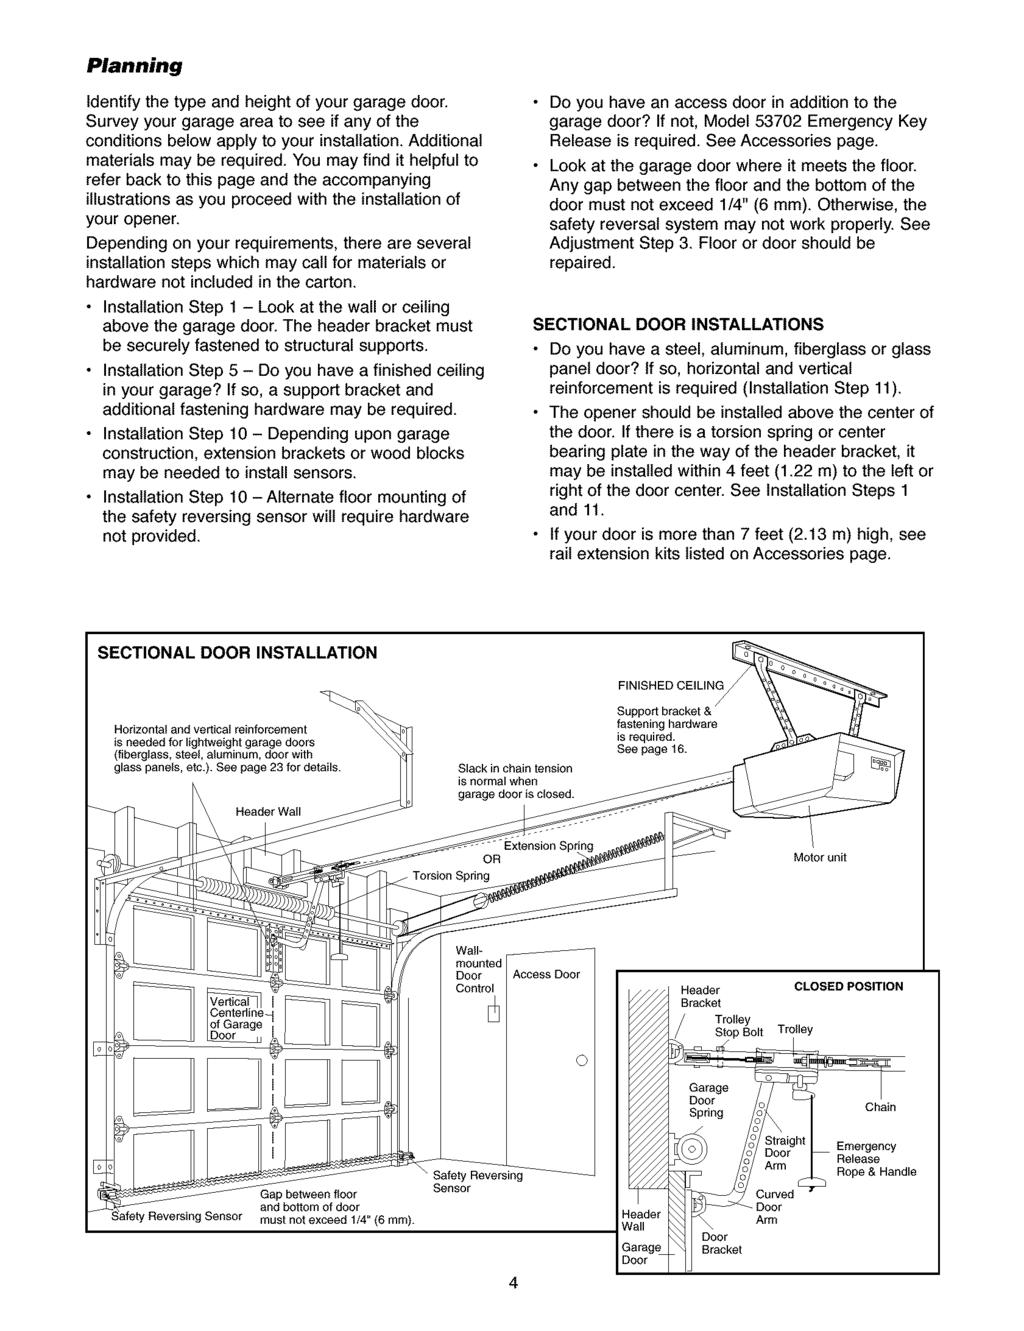 Planning Identify the type and height of your garage door. Survey your garage area to see if any of the conditions below apply to your installation. Additional materials may be required.